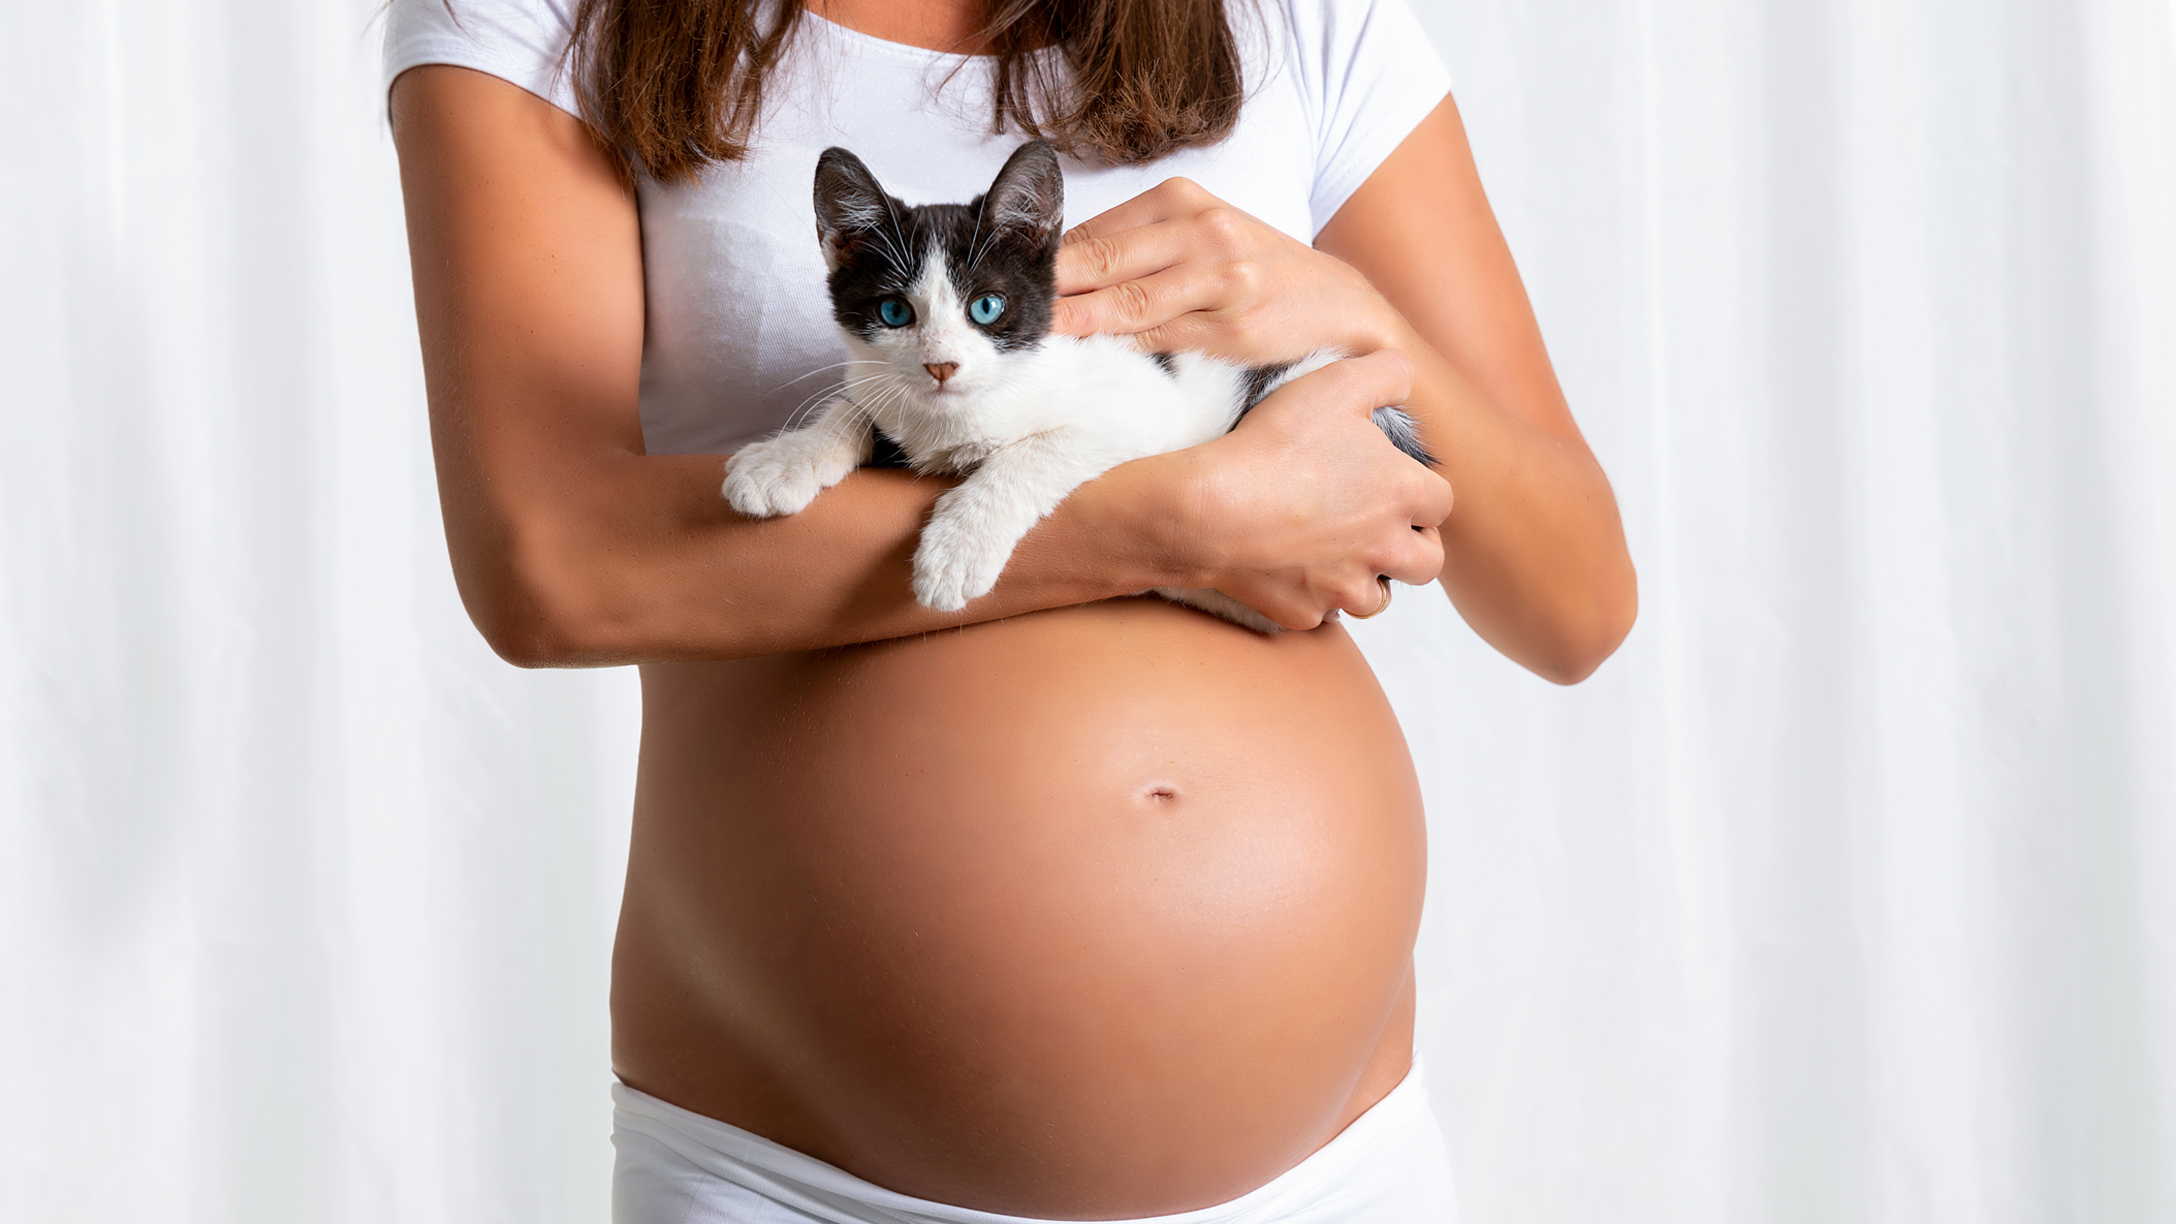 Cat Litter While Pregnant? | Mom 